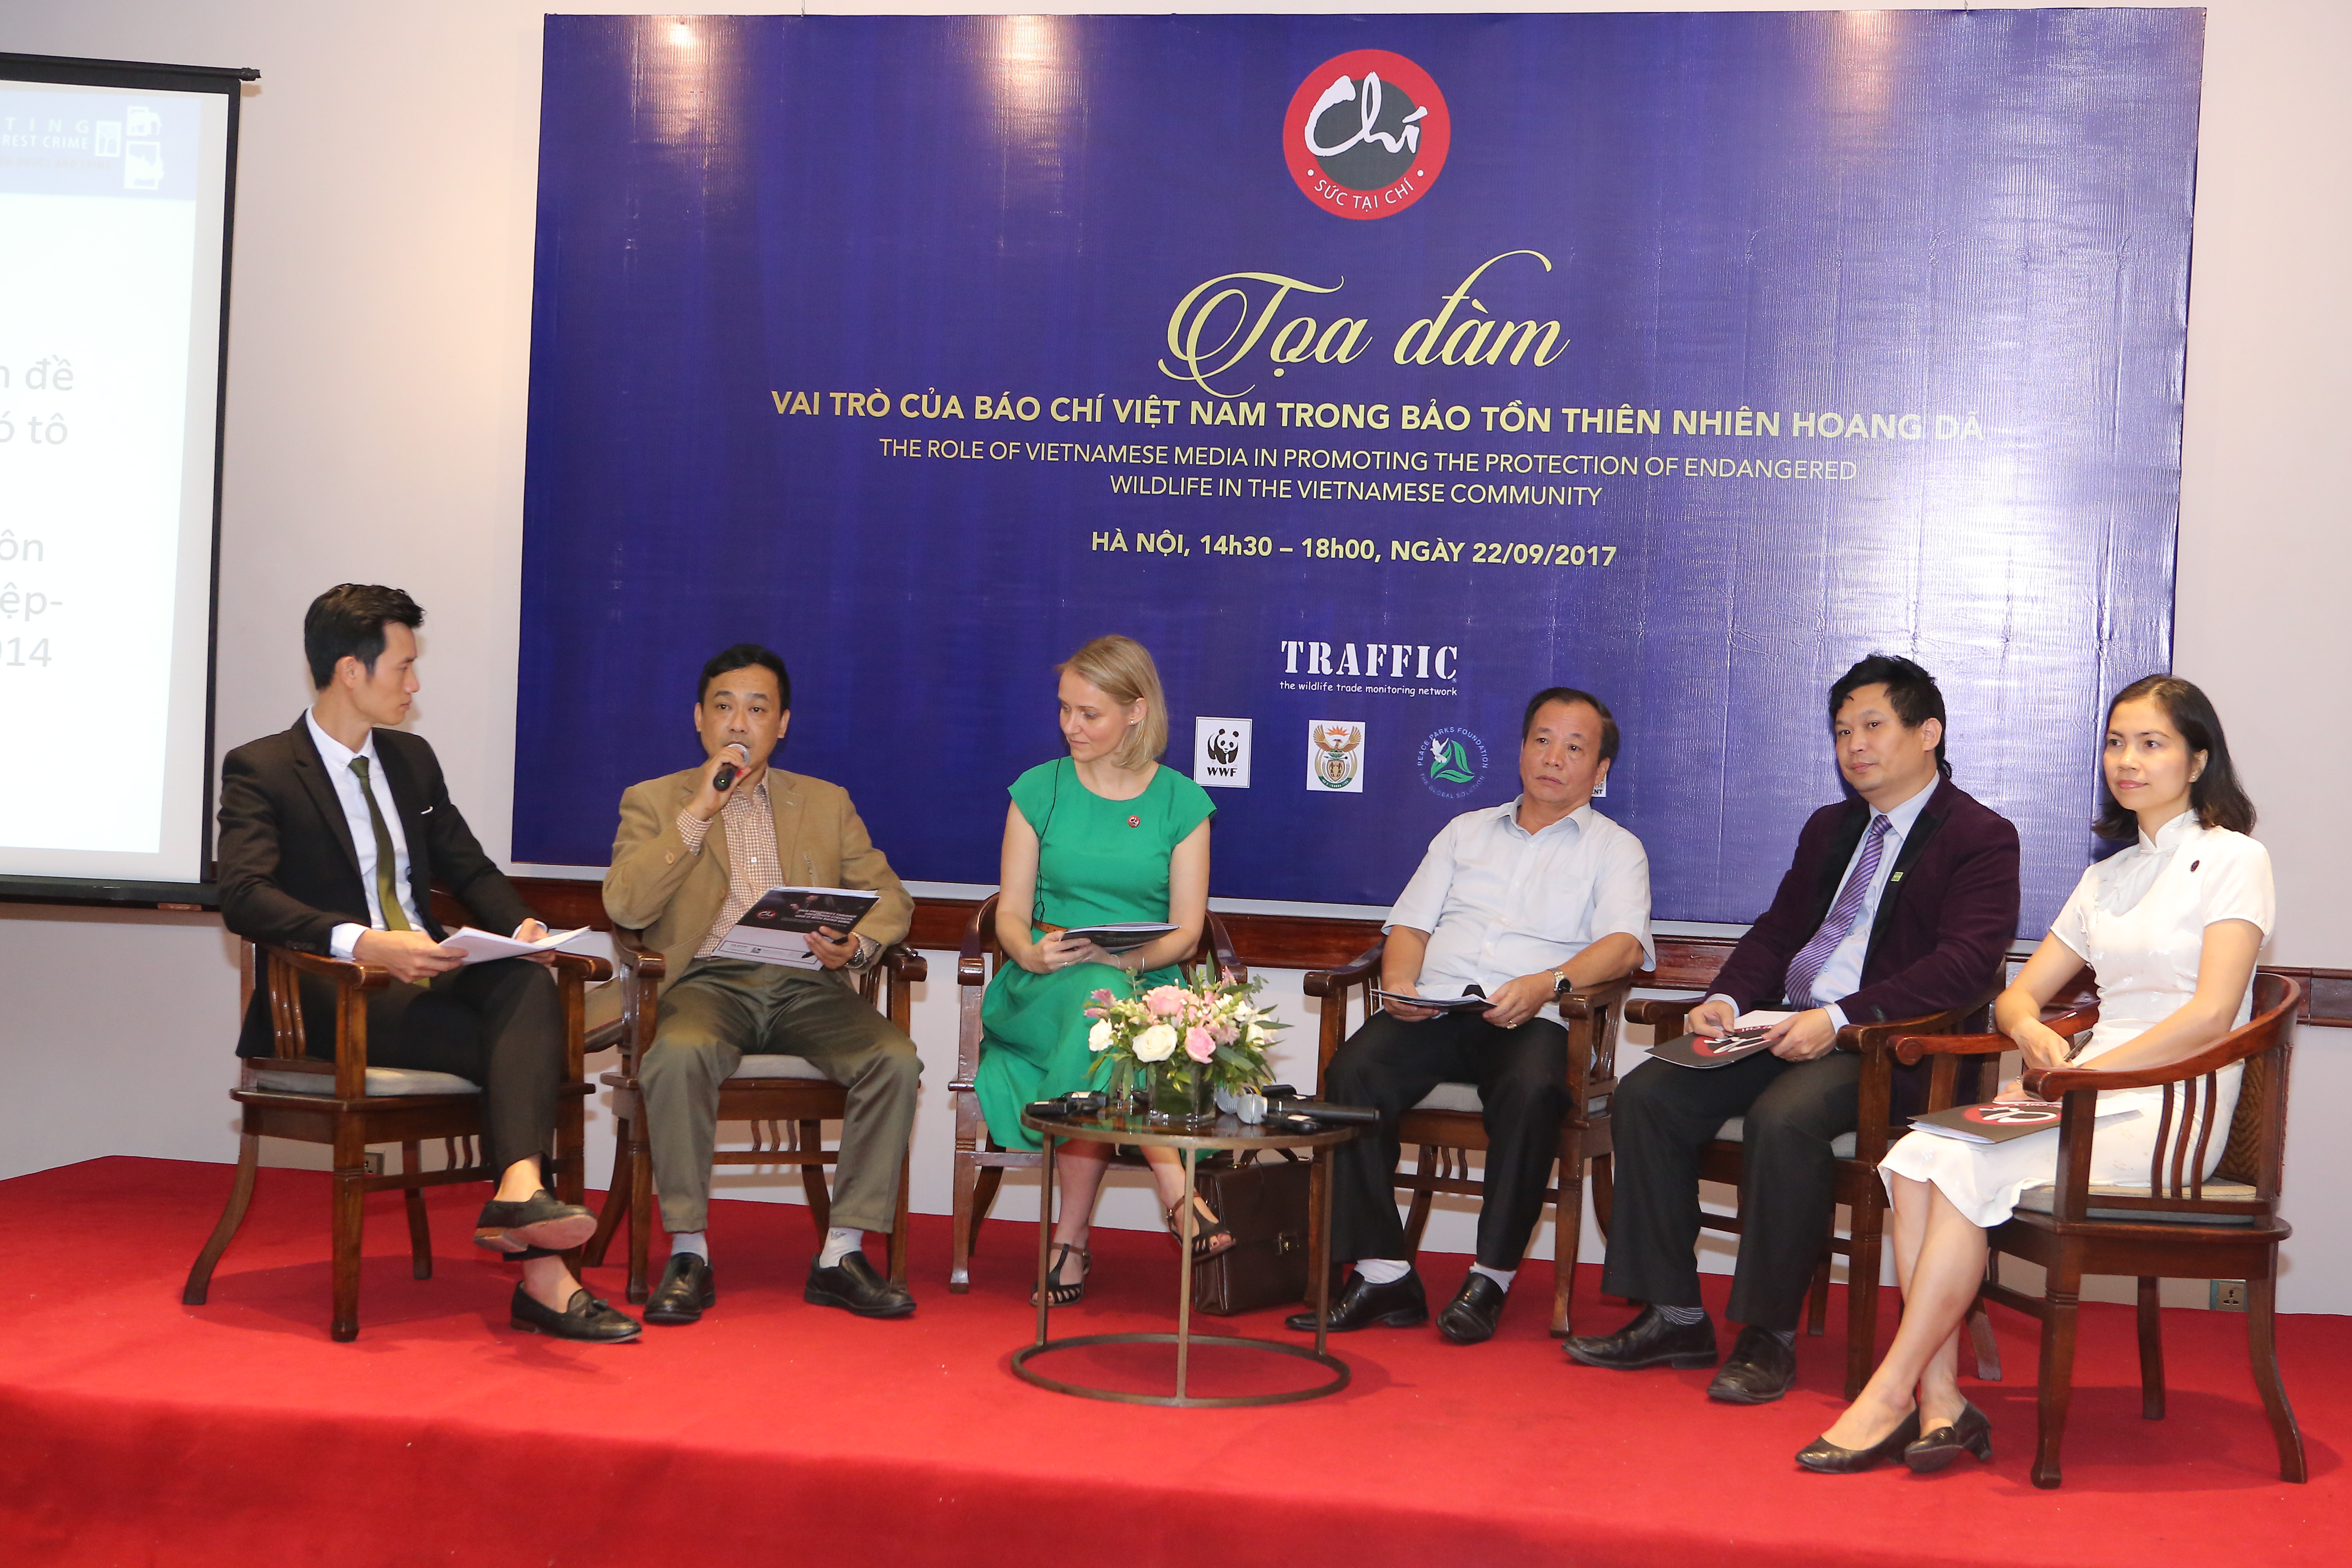 Vietnamese media to become “agents of change” in efforts to deter wildlife crime